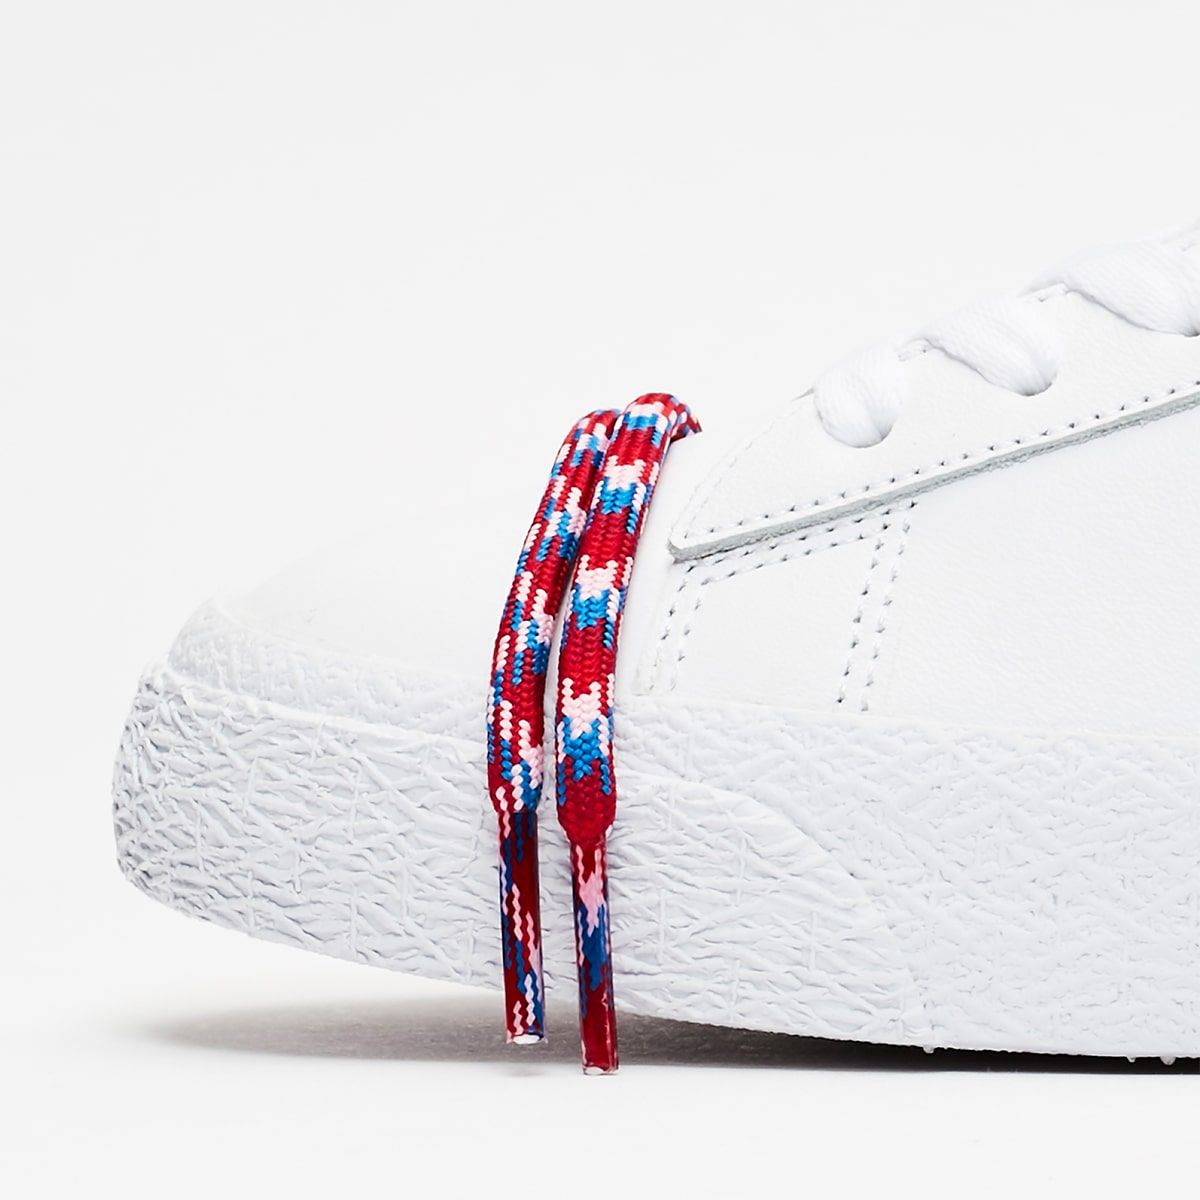 Detailed Looks At The Piet Parra X Nike Sb Blazer Low House Of Heat